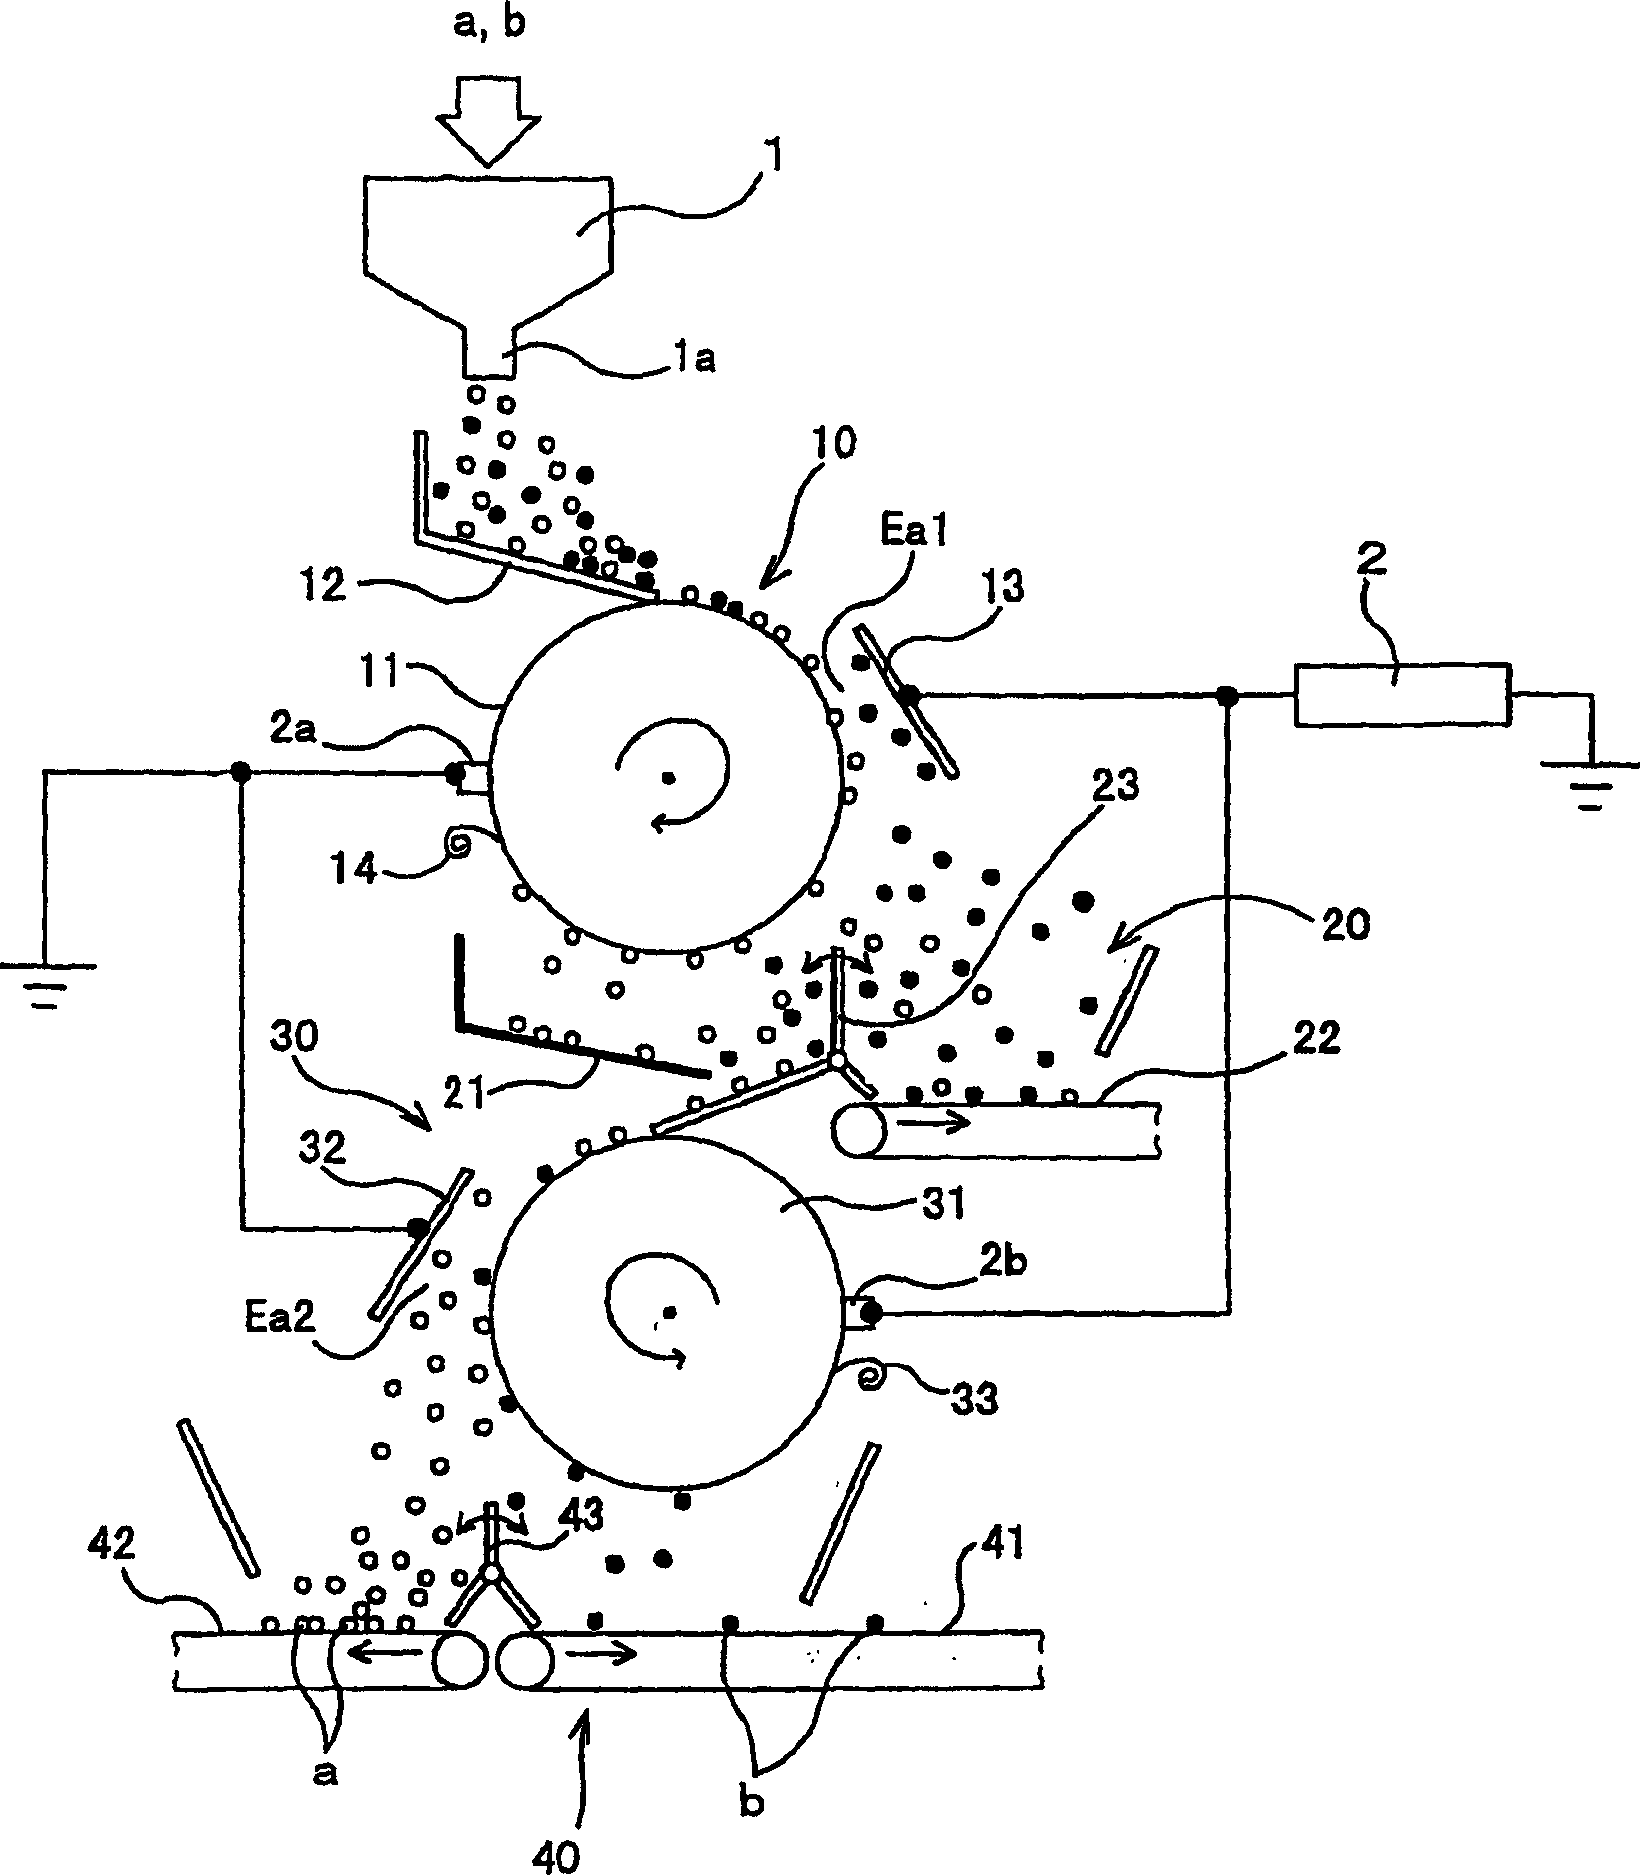 Apparatus for separating plastic chips